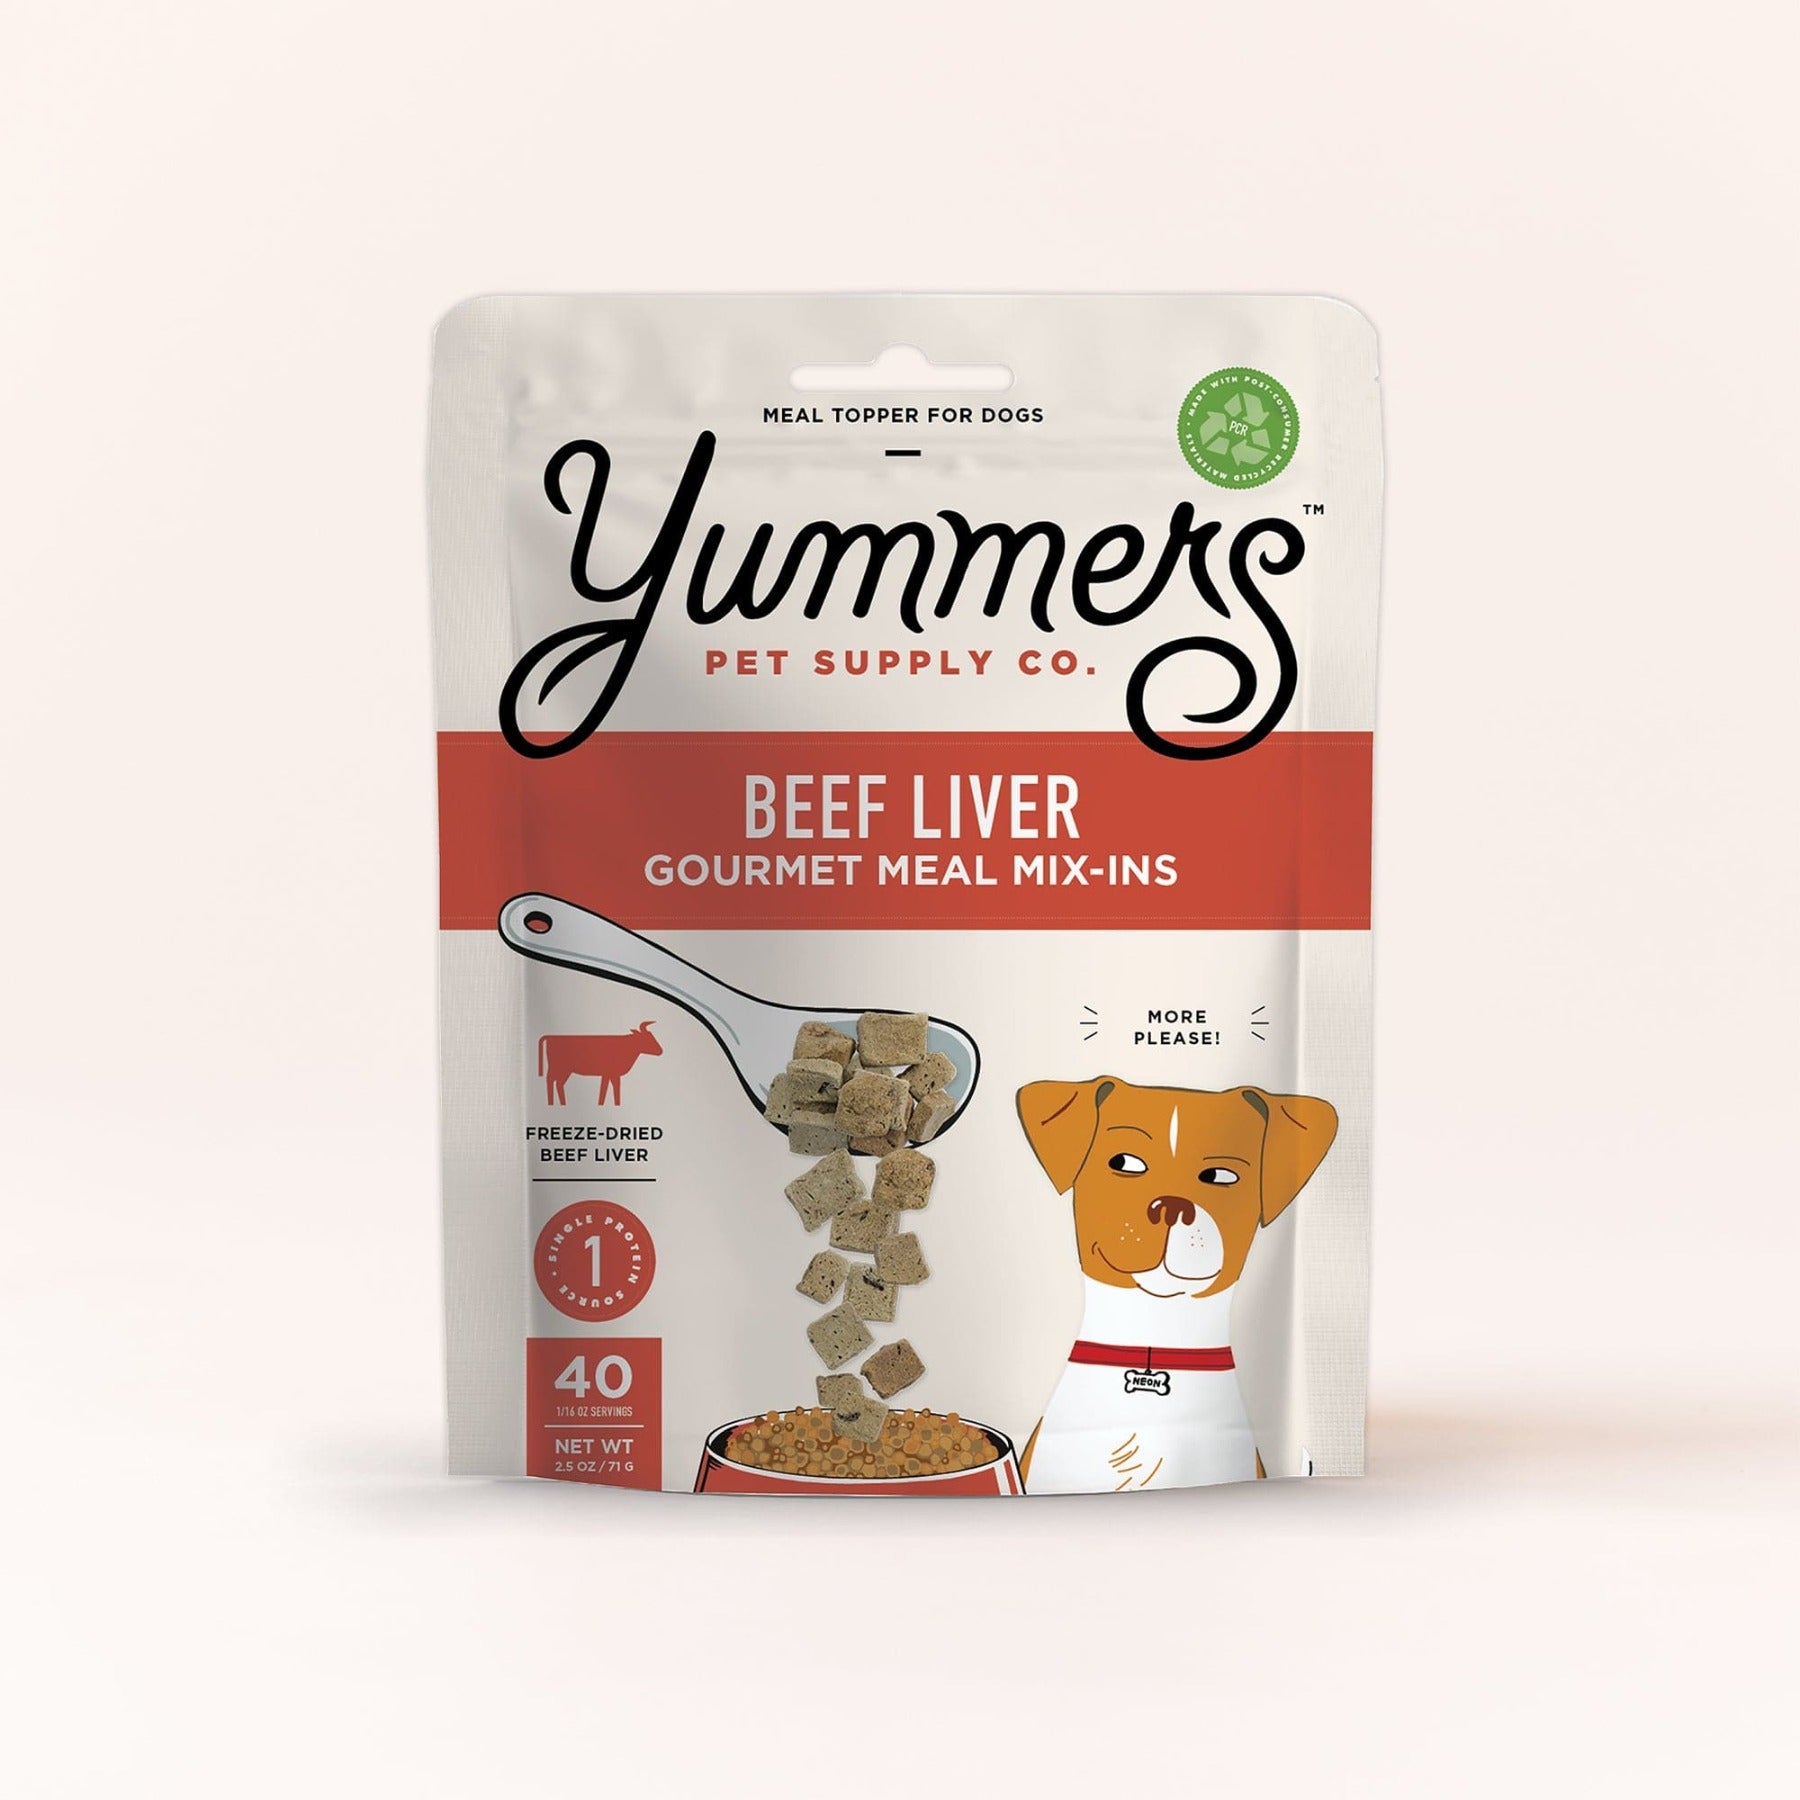 Yummers Freeze-dried Beef Liver